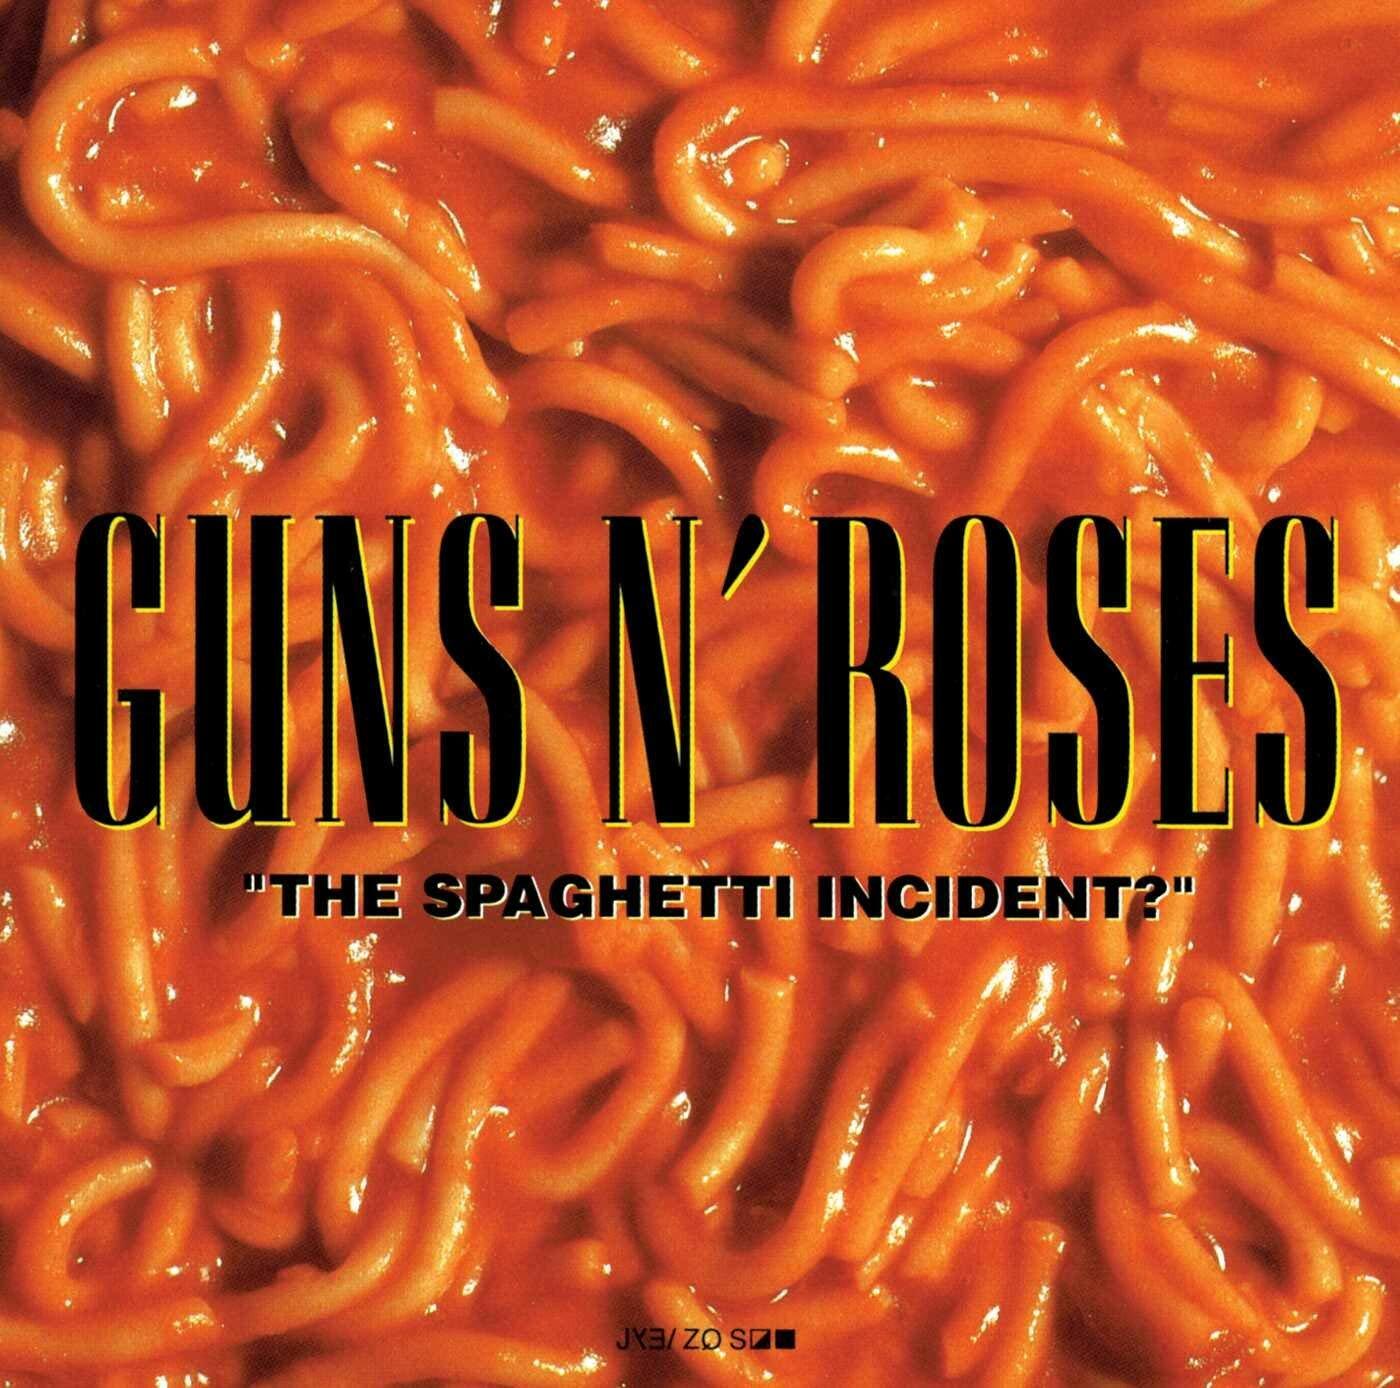 CD - Guns and Roses - The Spaghetti Incident